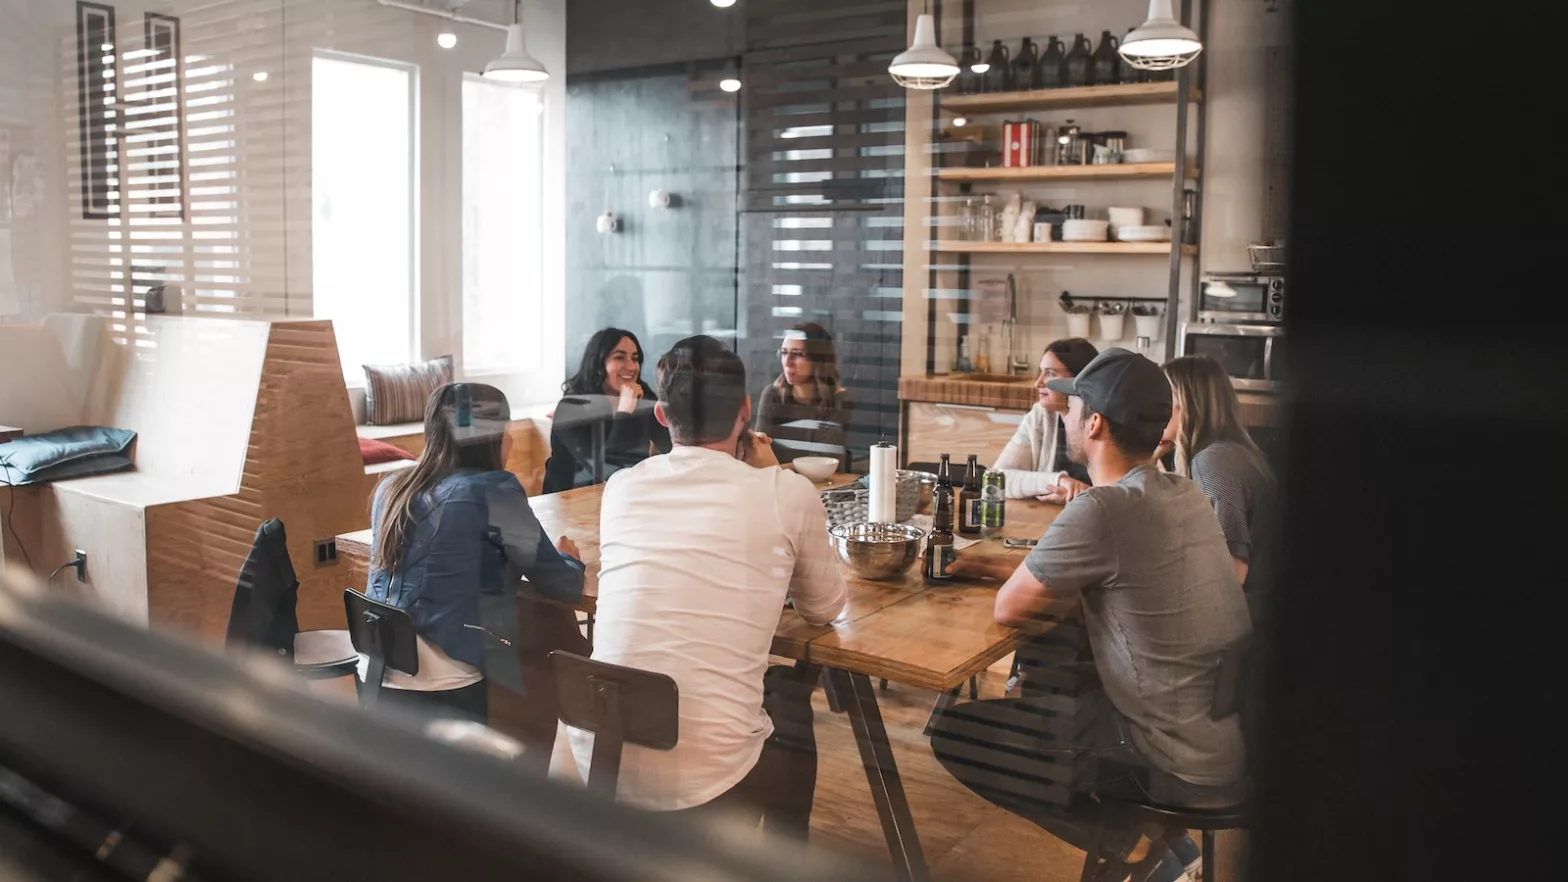 A group of diverse people sitting around a table, engaged in a discussion. This image represents the collaborative nature of the workplace and sets the stage for the discussion on the Baarda Model.